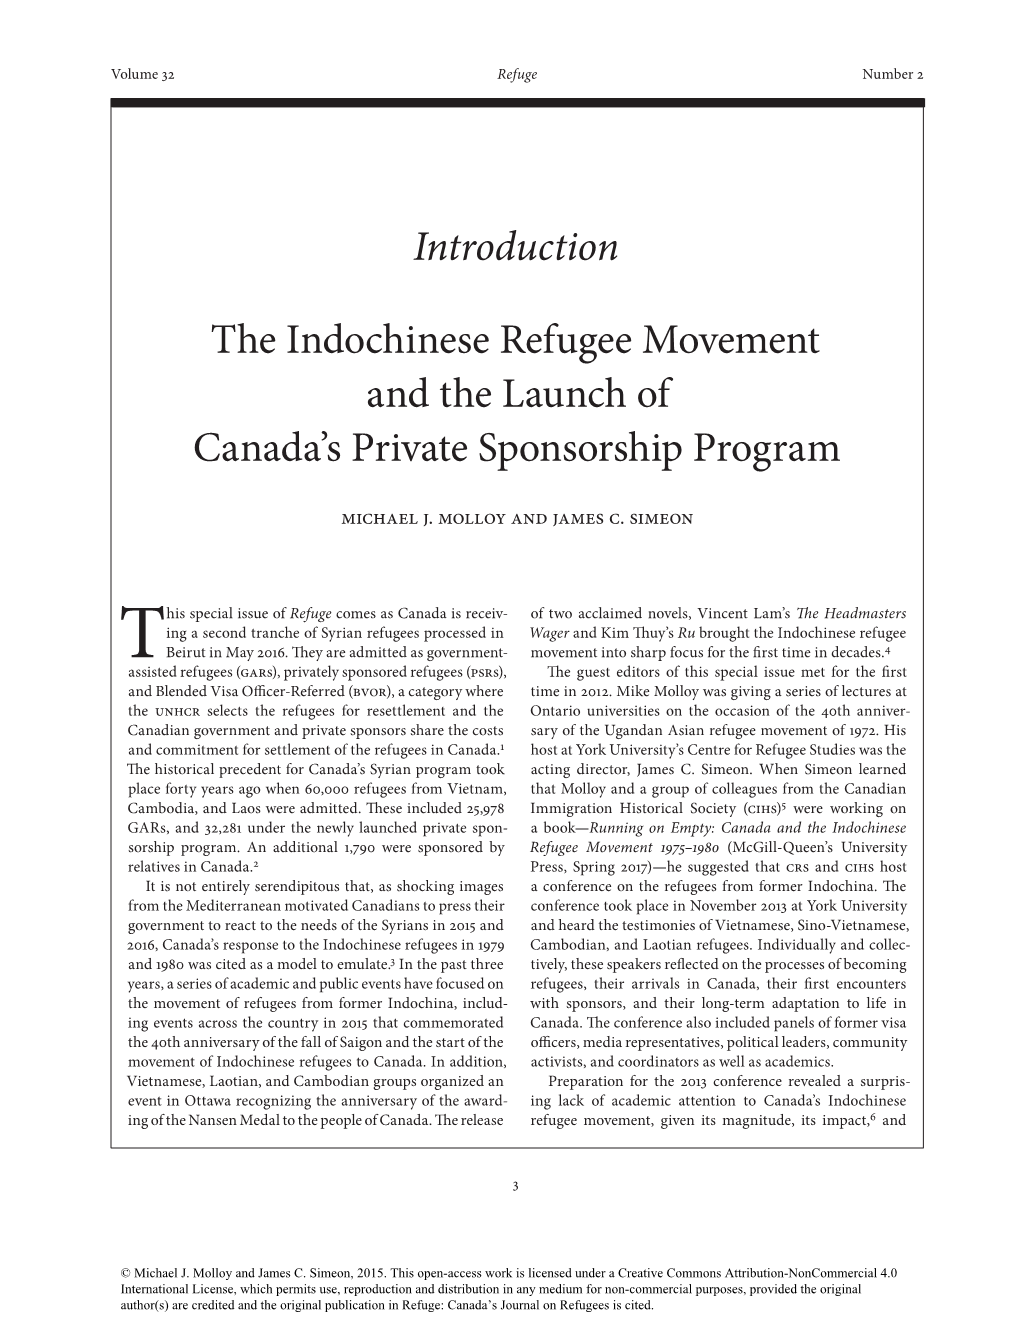 Introduction the Indochinese Refugee Movement and the Launch of Canada's Private Sponsorship Program